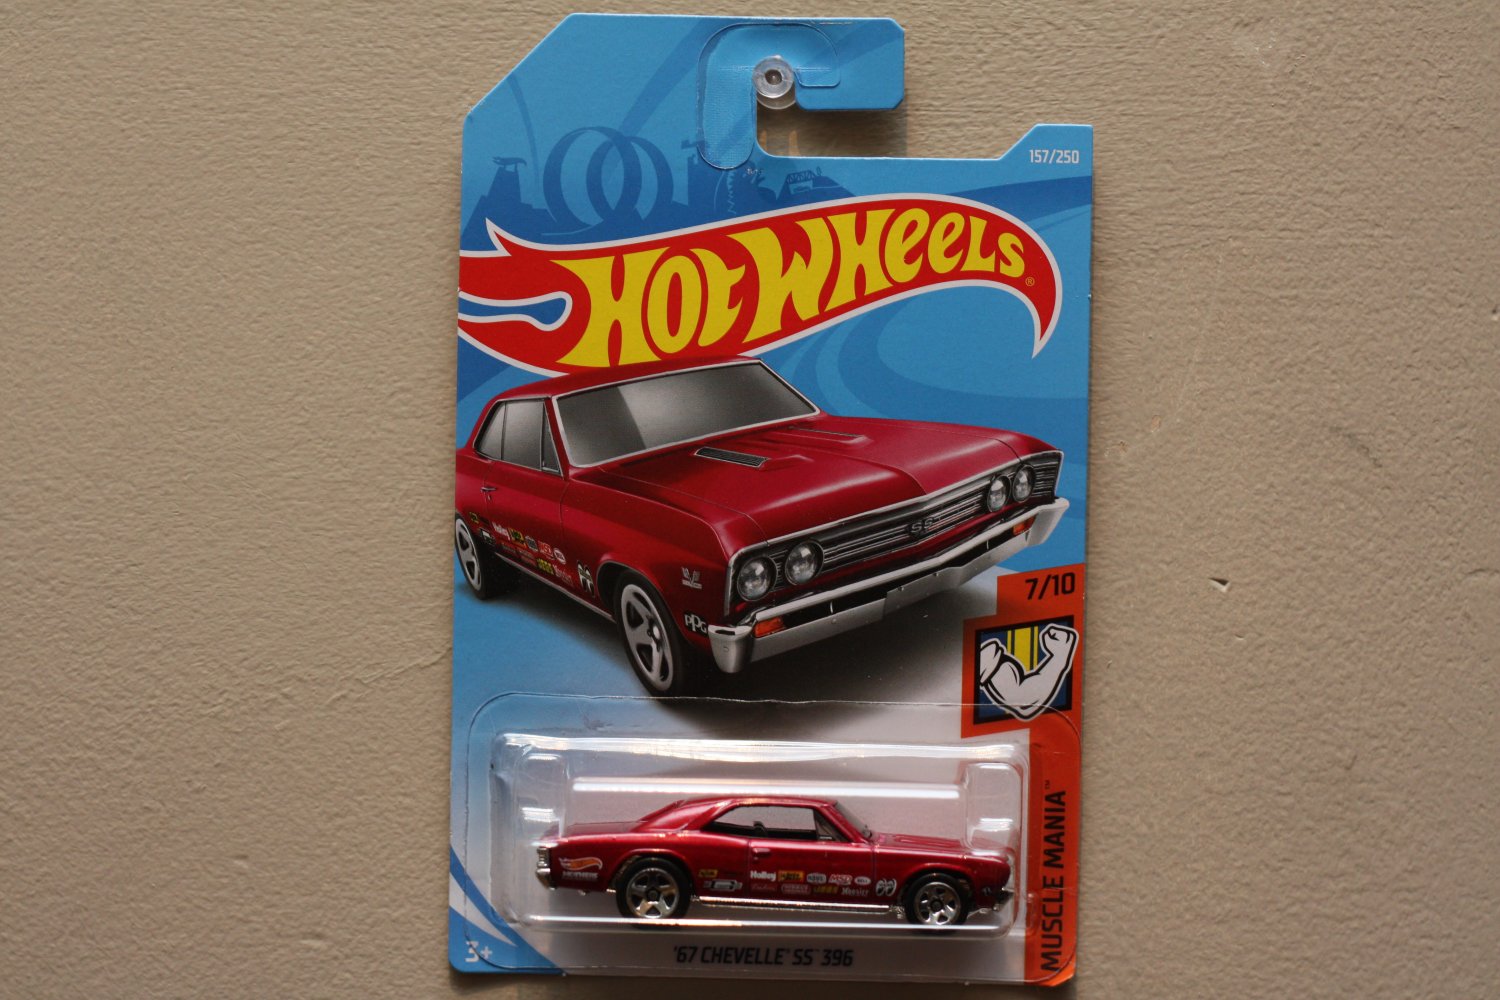 2019 HOT WHEELS #157 MUSCLE MANIA'67 Chevelle SS 396 